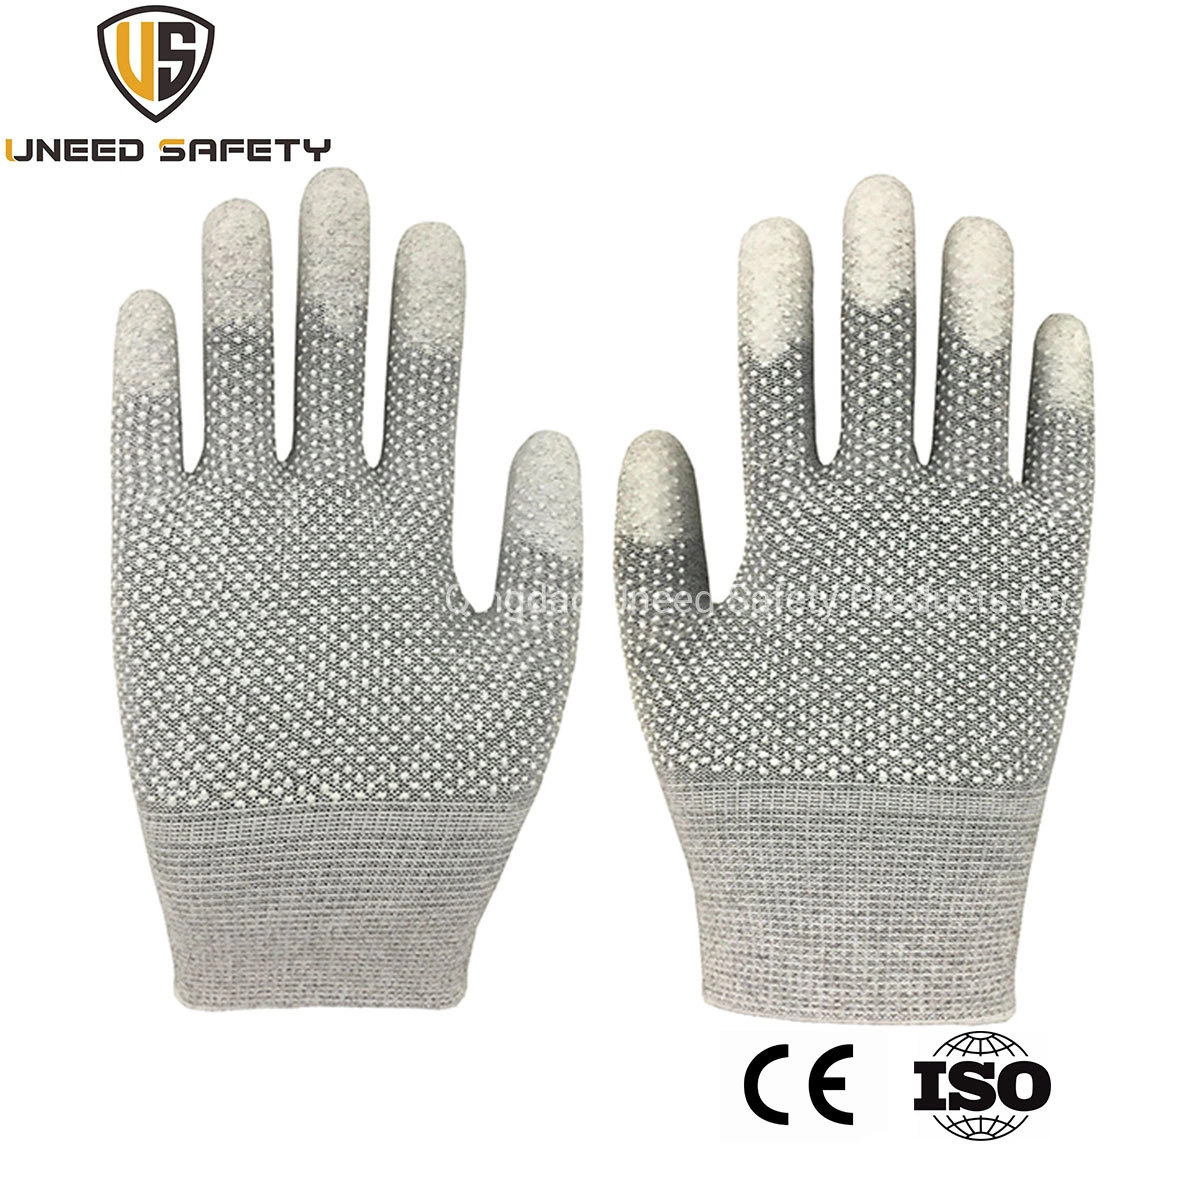 13G Hand Protect Safety Work Polyester Printing Colorful Pattern PU Coated Garden Labor Working Gloves